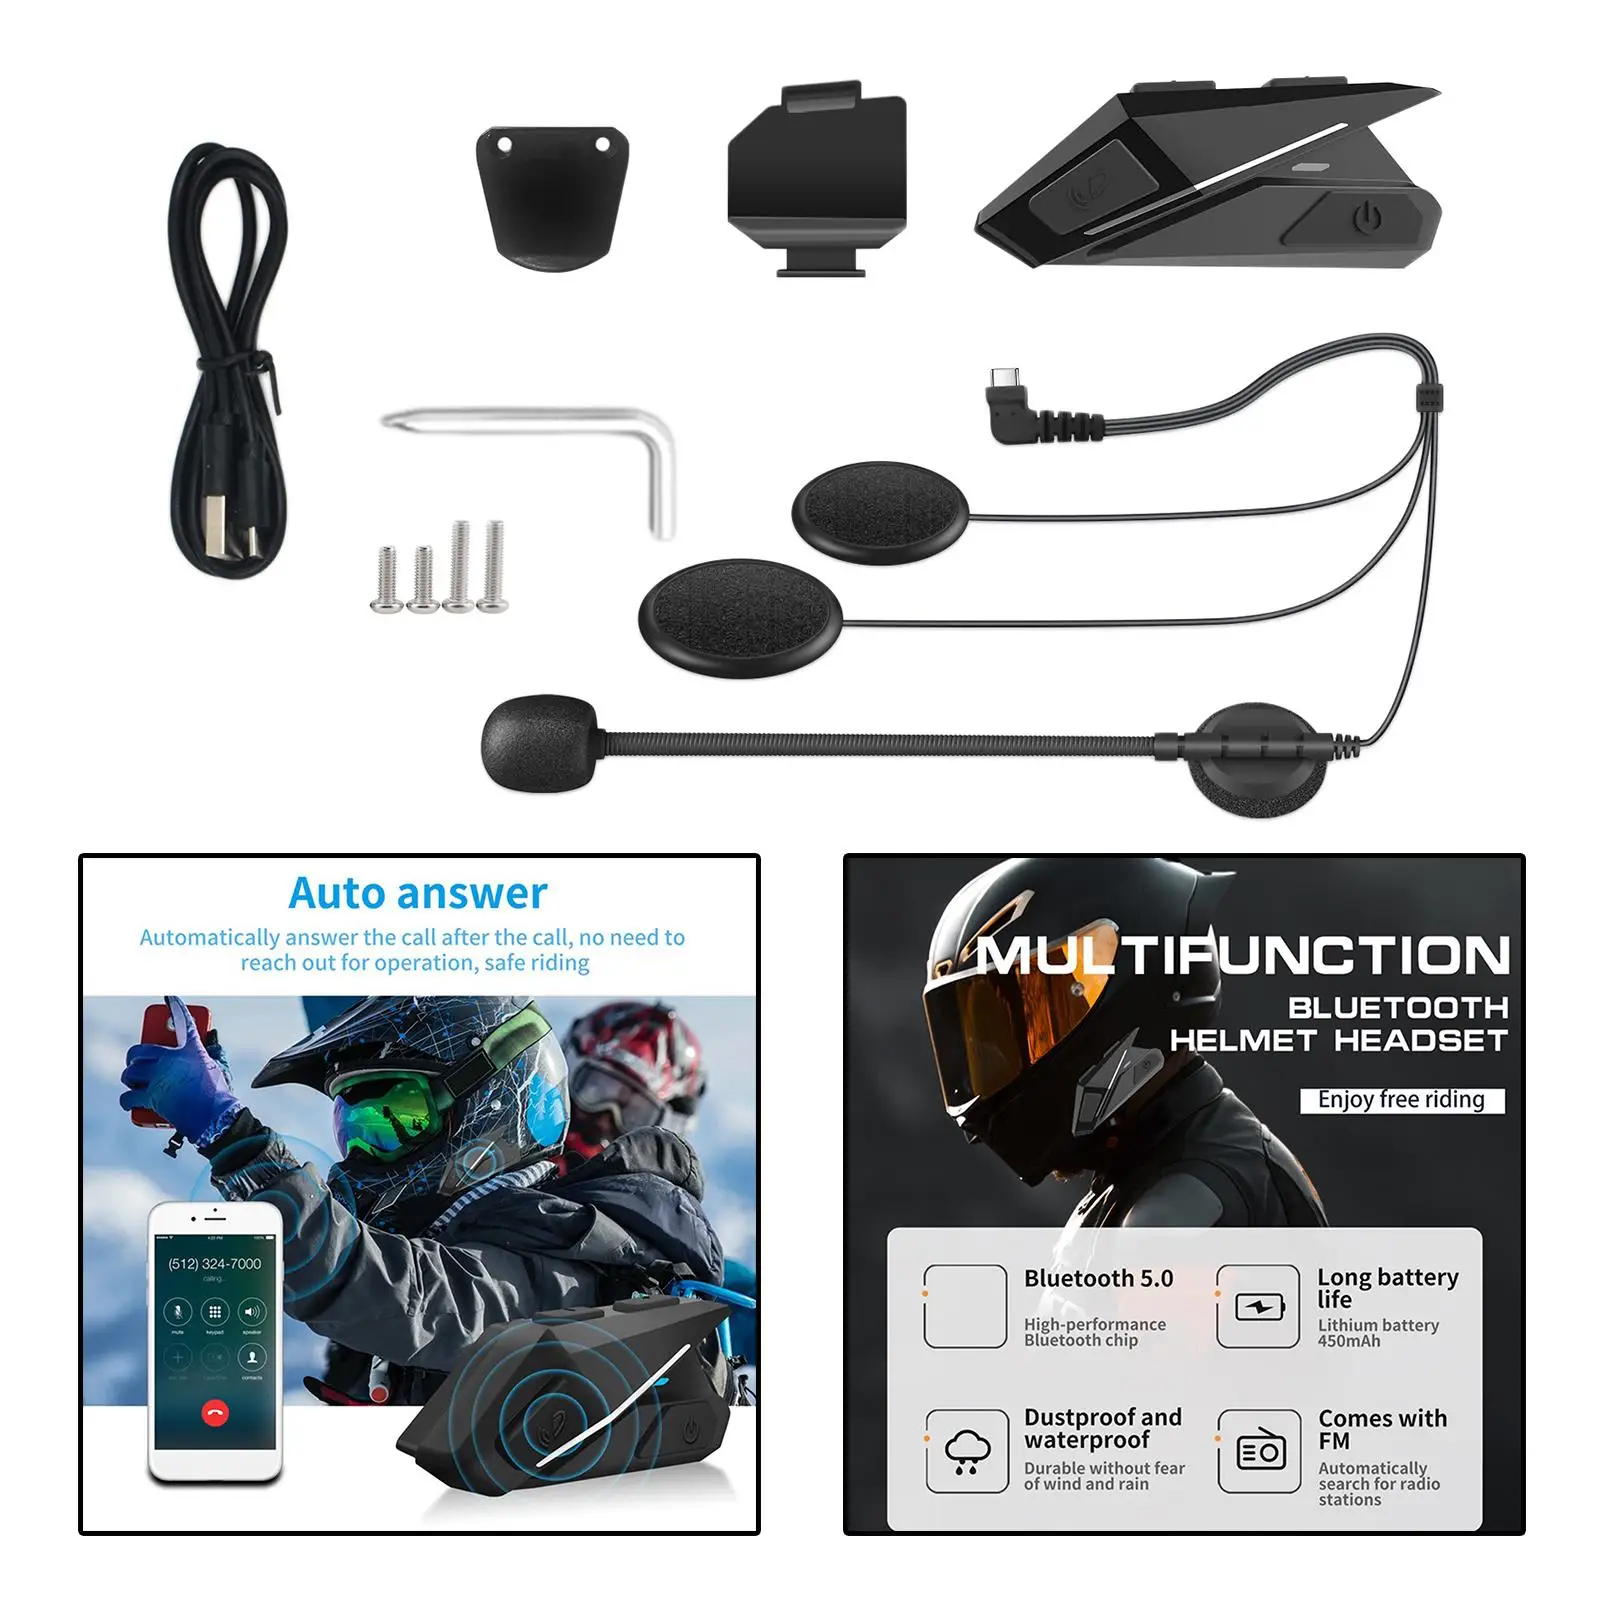 Motorcycle Bluetooth 5.0 Headset with FM Radio 10H Playing Time 450mAh Battery Headphone for Most Helmets Outdoor Sports Riding